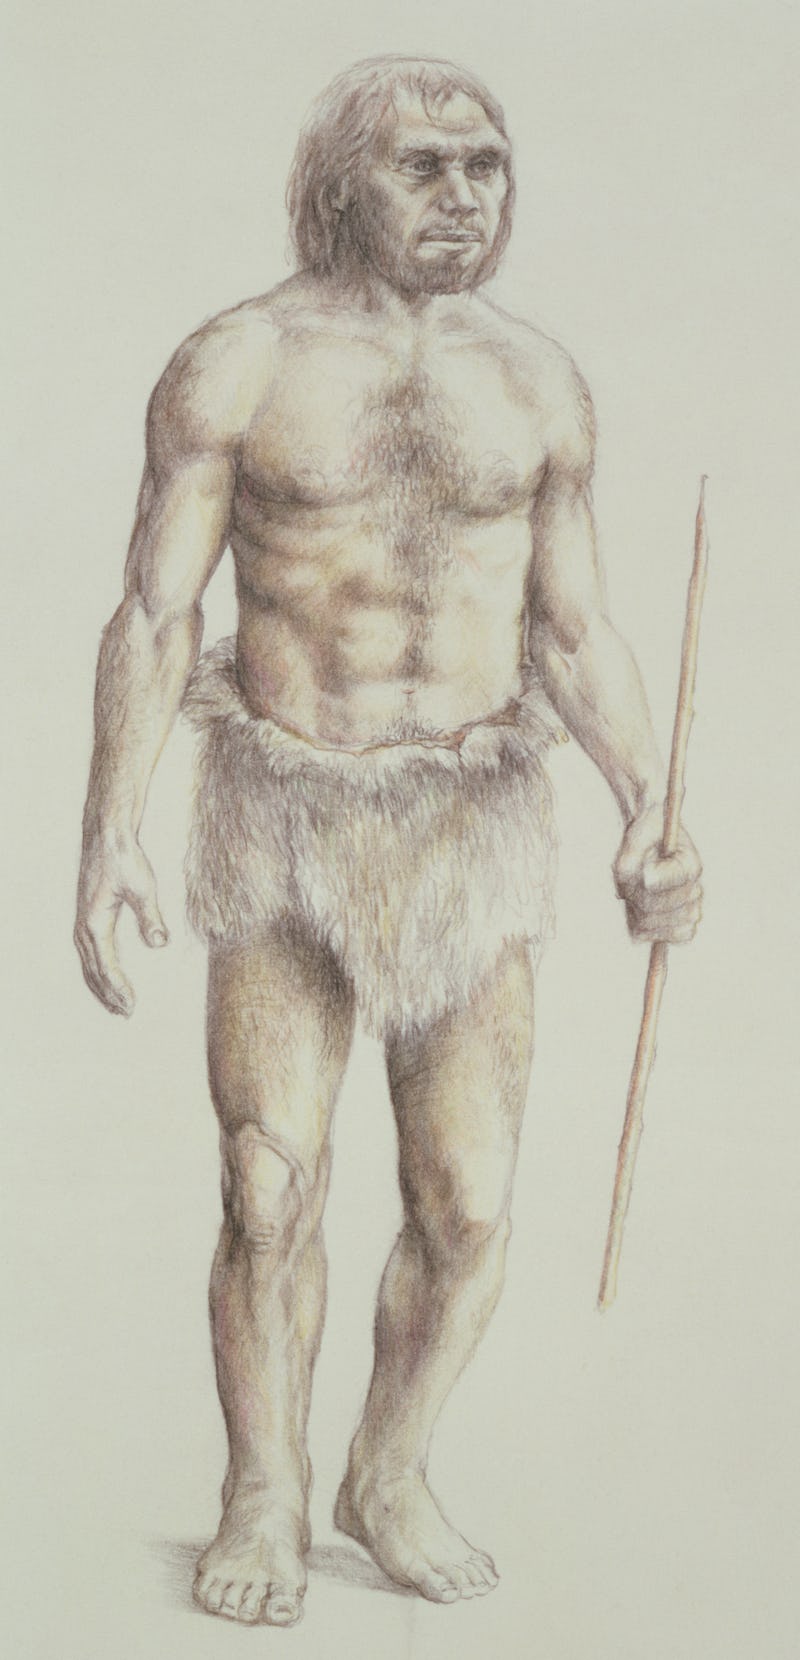 Neanderthal Man (pencil on paper) (Photo by Art Images via Getty Images)